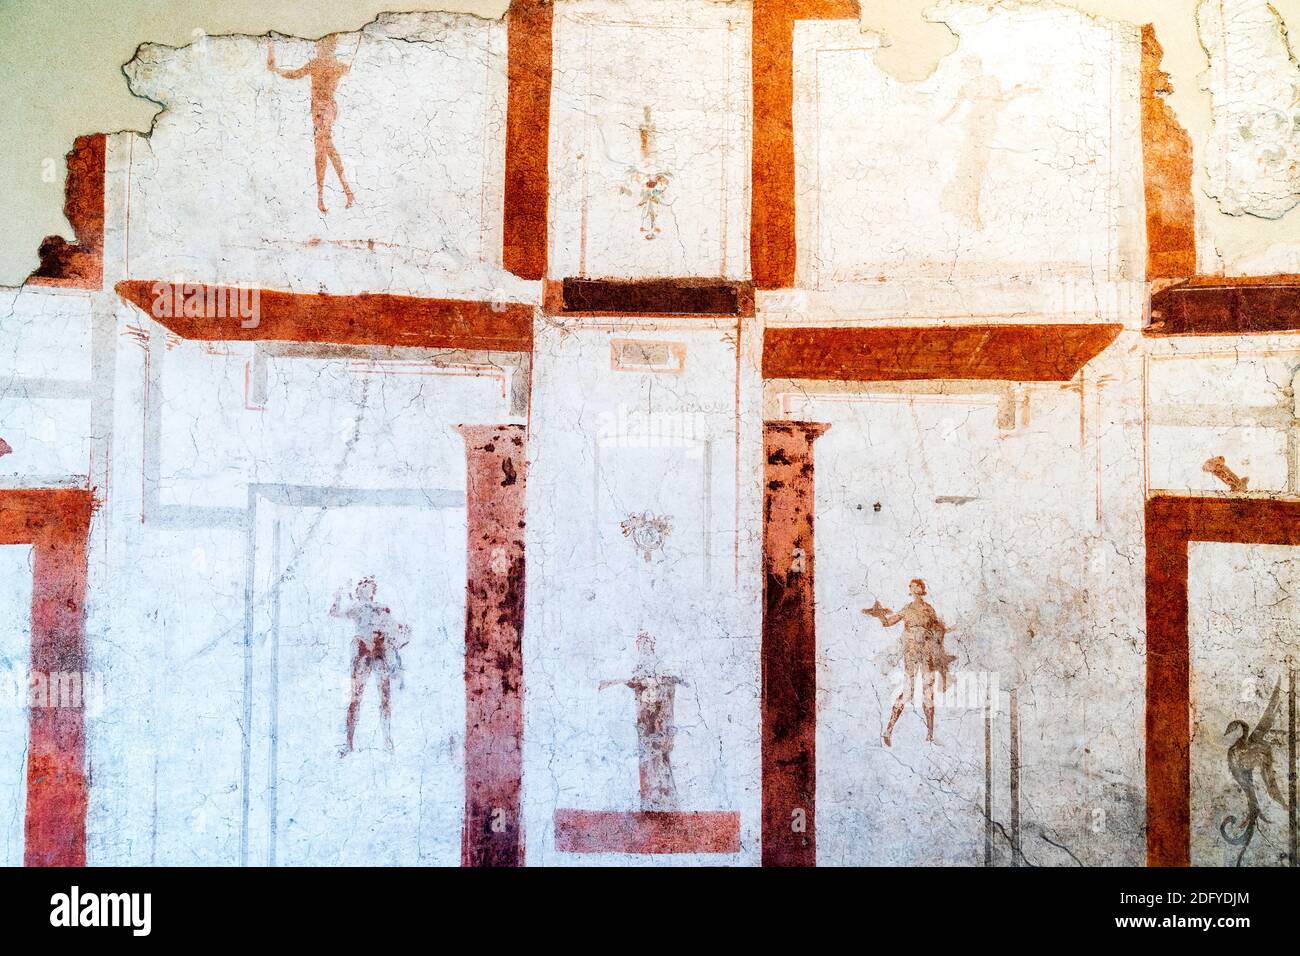 Bedroom wall Roman period Fresco relating to the feminine world from the Villa of Farnesina displayed at the National Roman Museum, Palazzo Massimo. Stock Photo